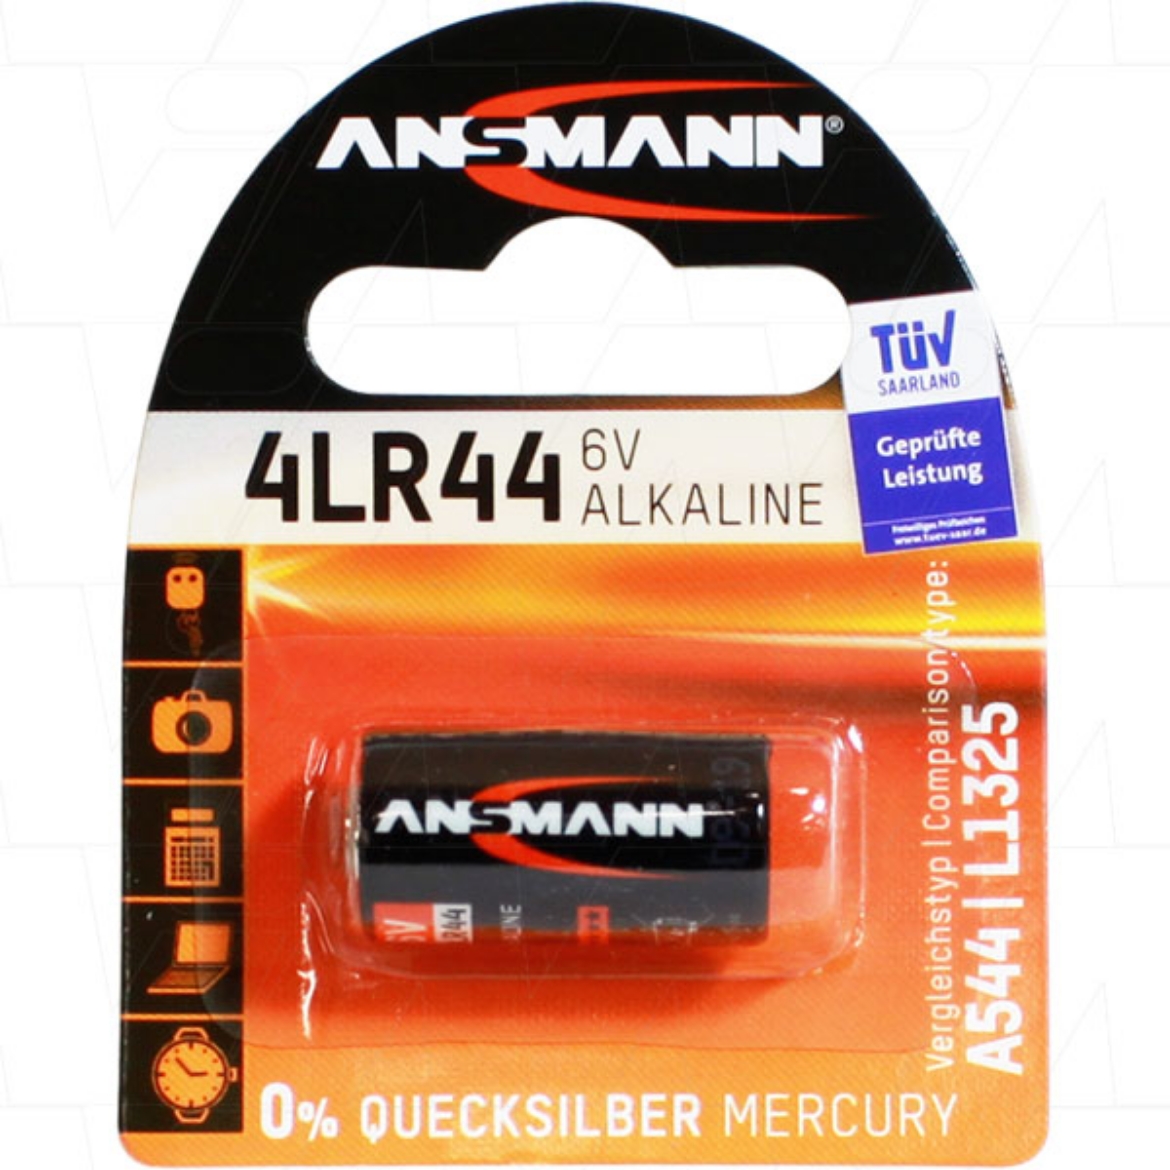 Picture of 4LR44 ANSMANN 6V ALKALINE NON-RECHARGEABLE BATTERY